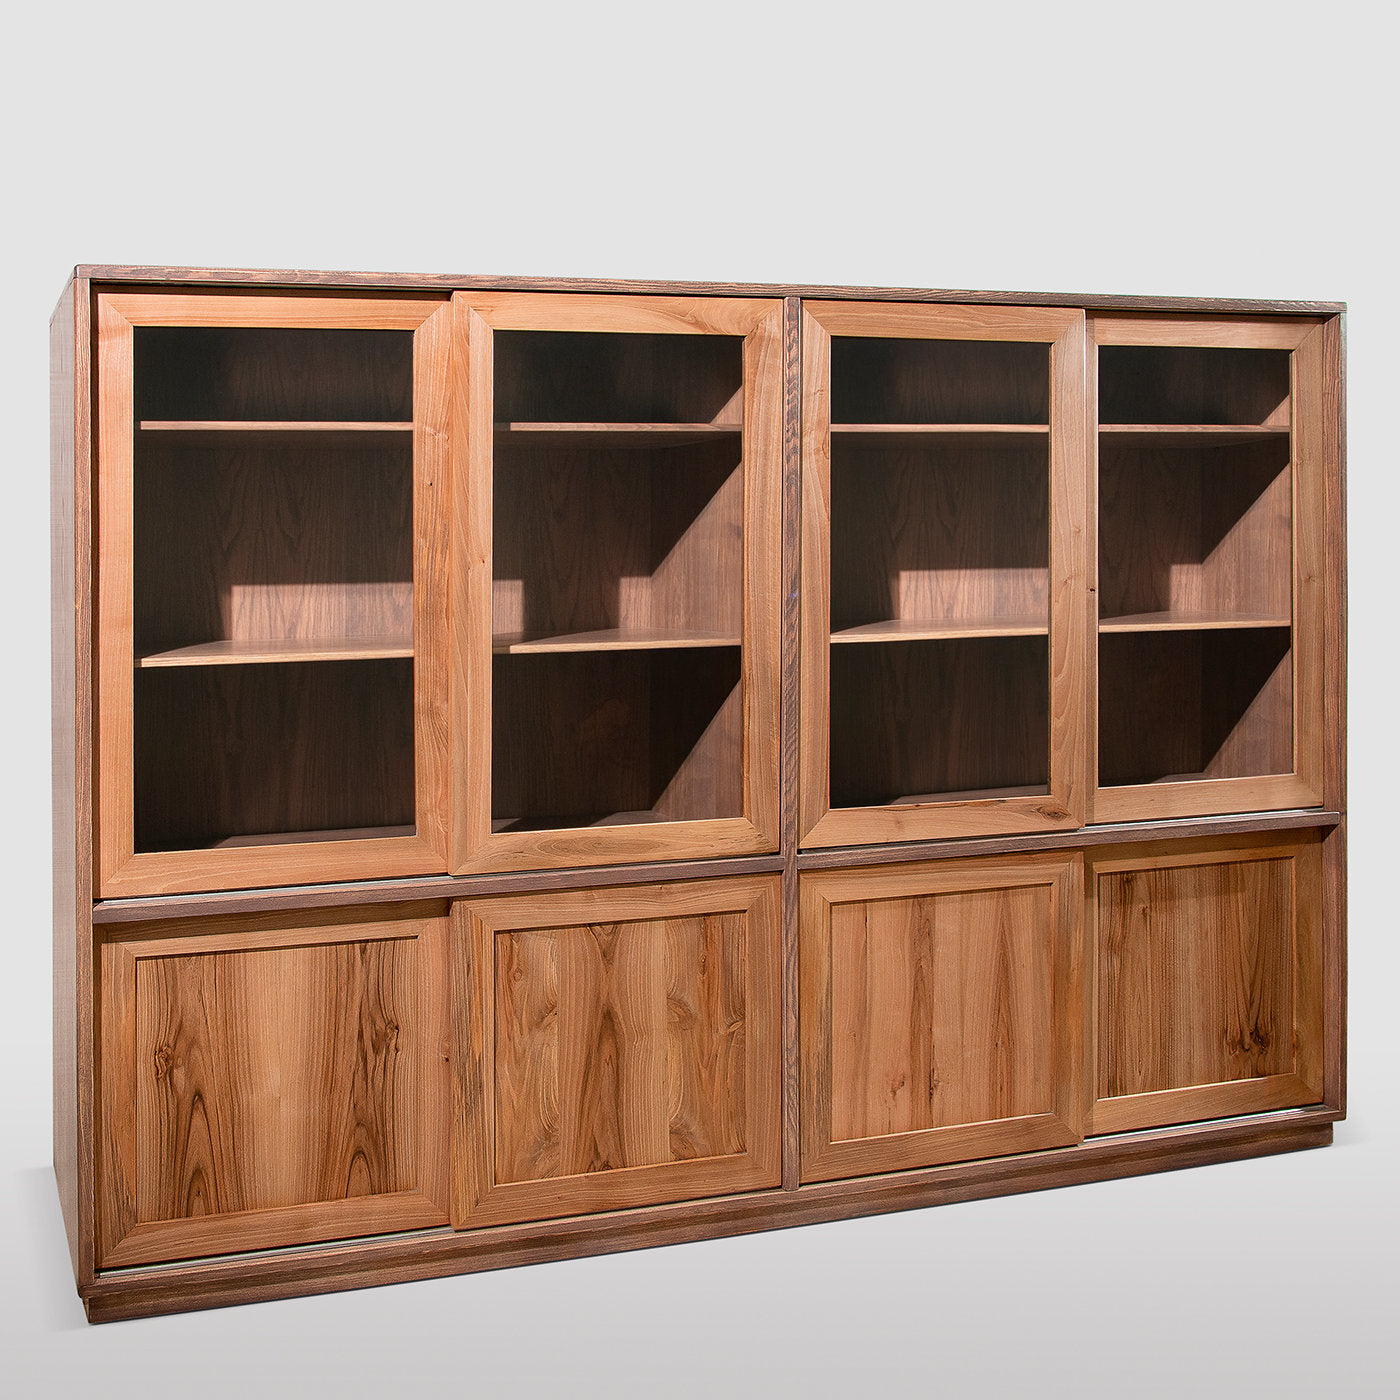 Nordic-Style Modular Bookcase with Sliding Doors - Alternative view 2